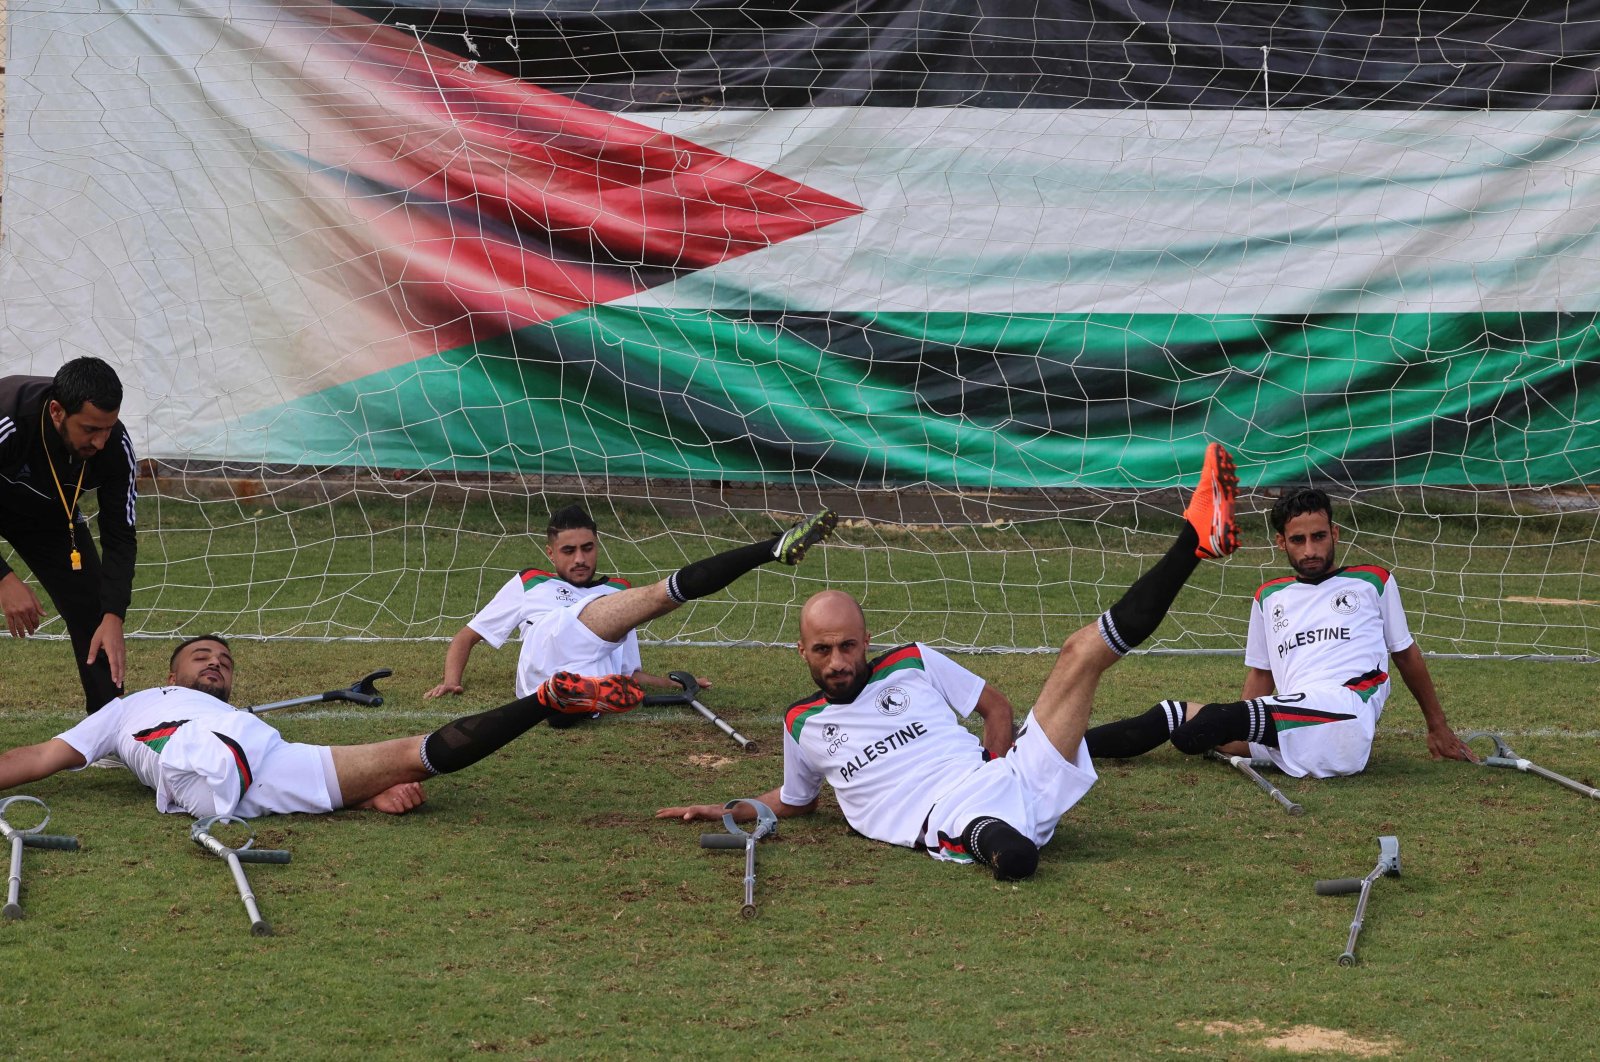 Palestinian players with disabilities, part of a football team organized by the International Committee of the Red Cross (ICRC), take part in a training session in Gaza City, the Gaza Strip, Palestine, Dec. 2, 2021. (AFP Photo)